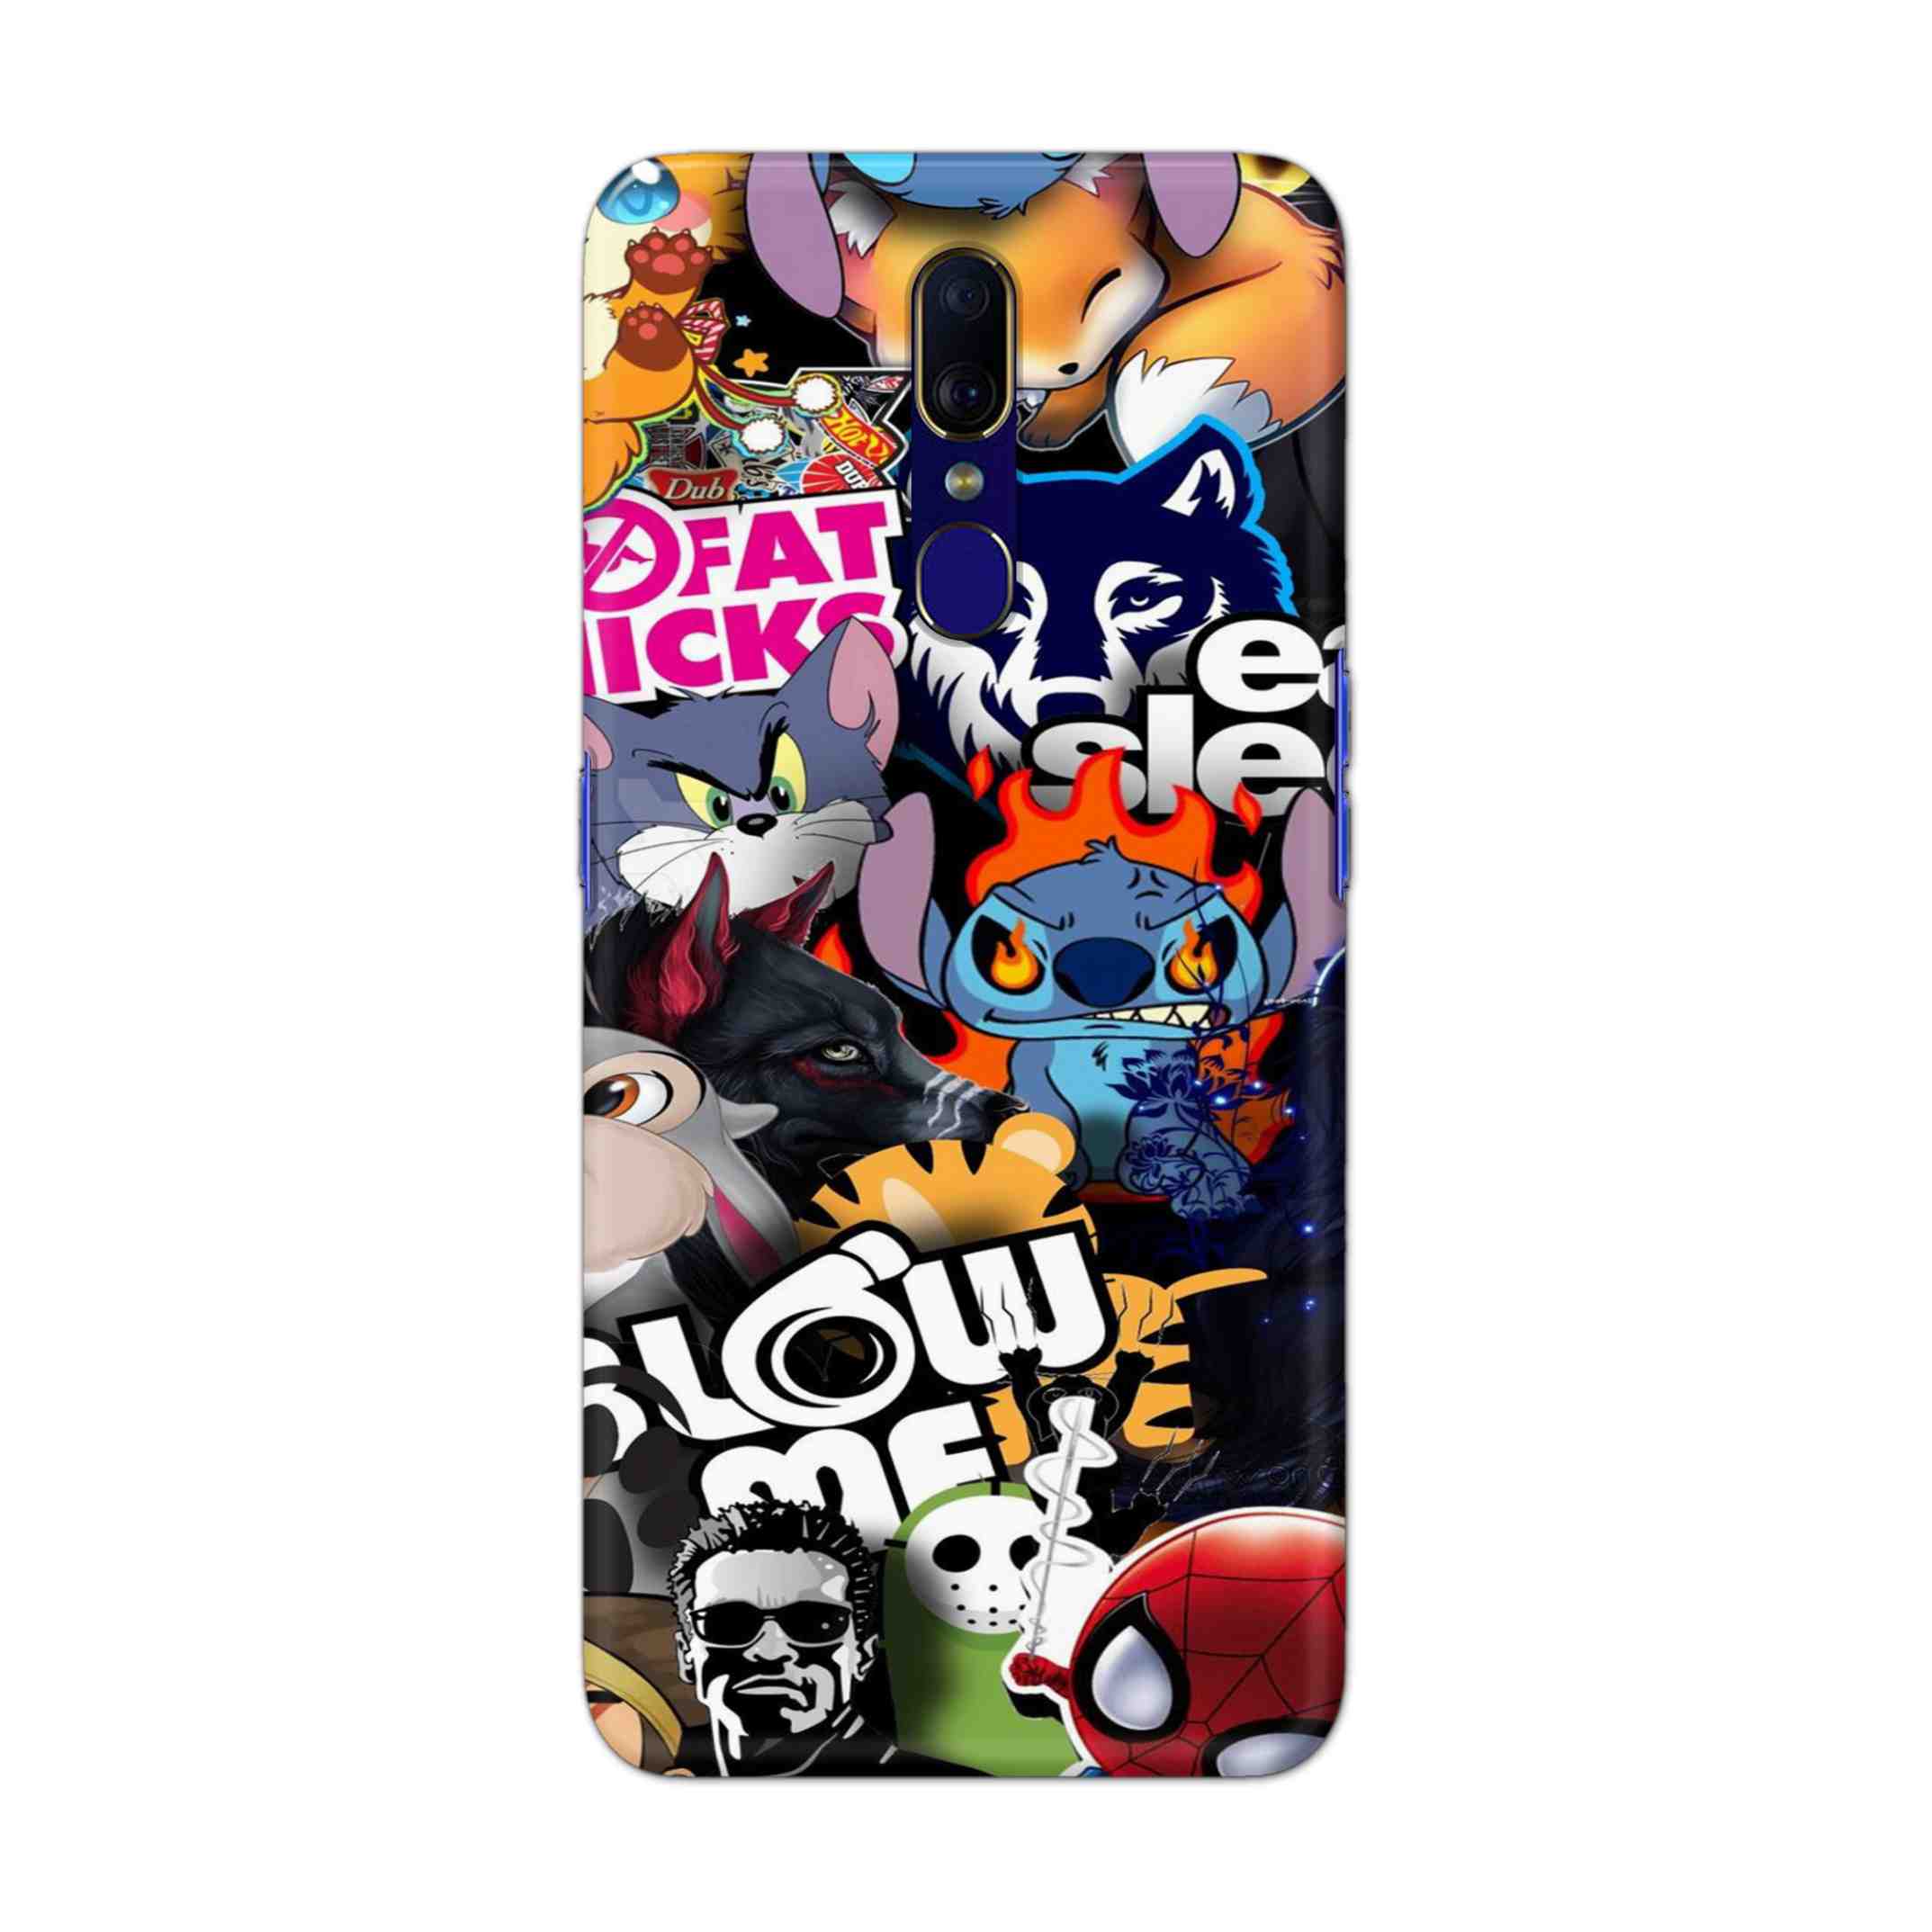 Buy Blow Me Hard Back Mobile Phone Case Cover For OPPO F11 Online